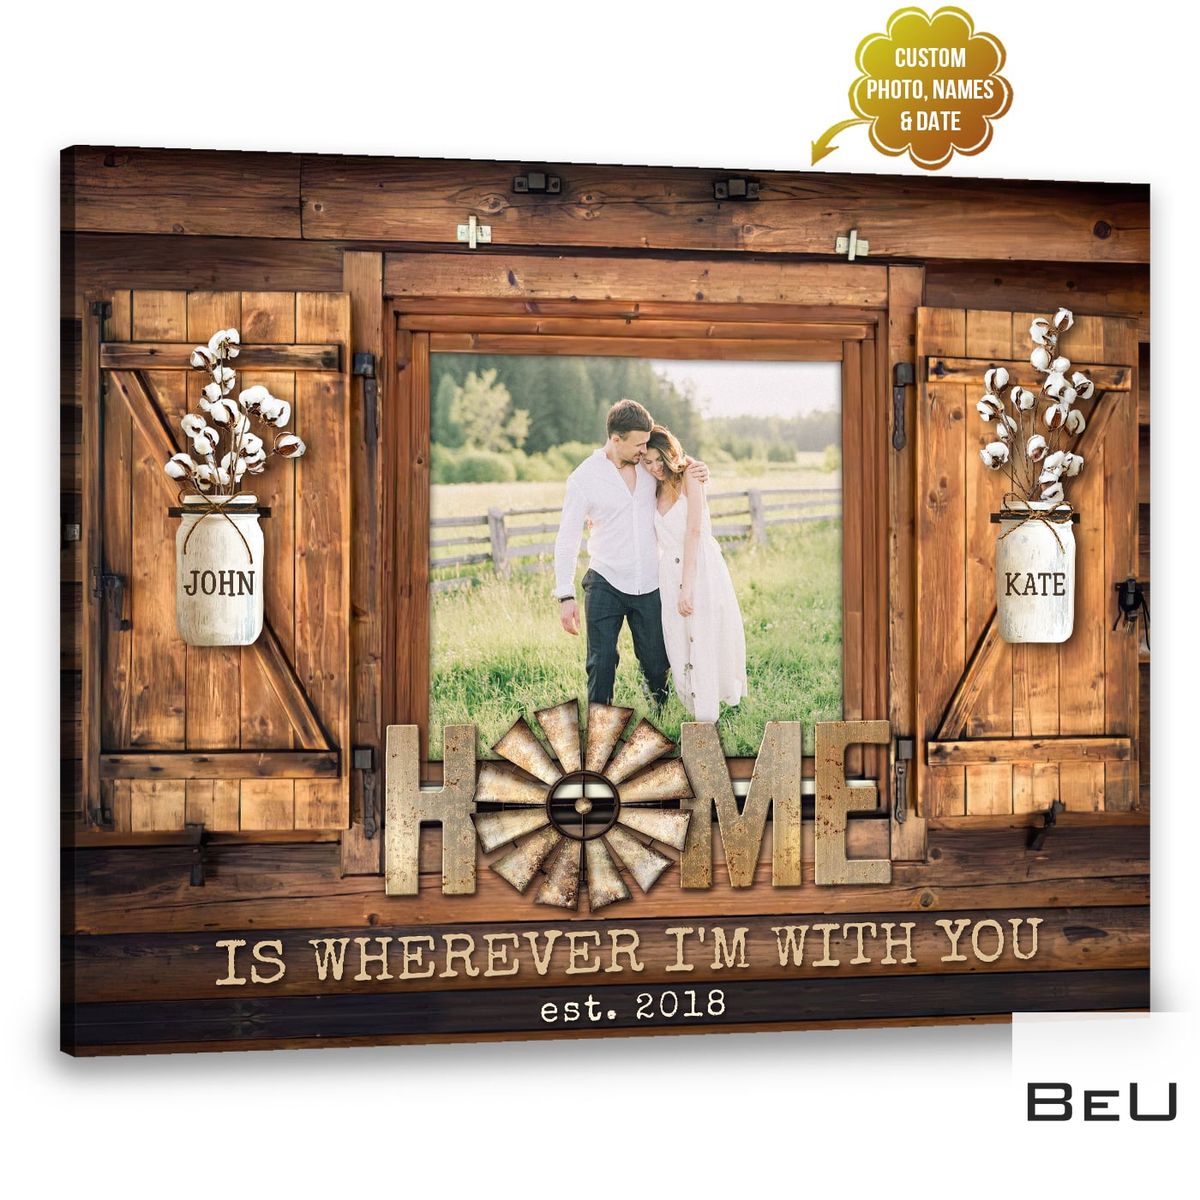 Personalized Photo Gifts Home Is Wherever I’m With You Canvas